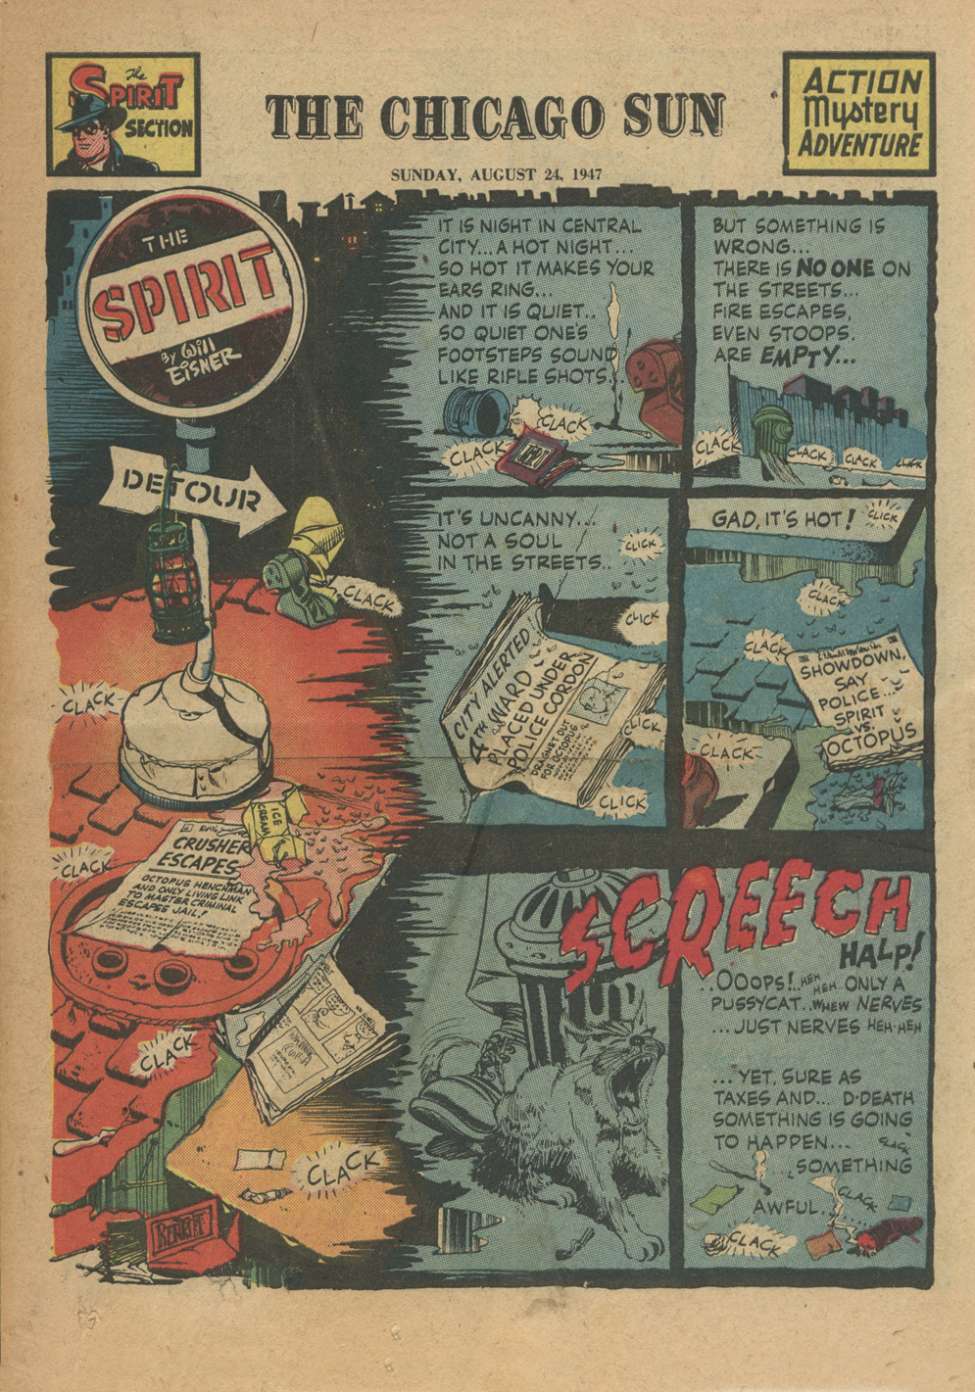 Comic Book Cover For The Spirit (1947-08-24) - Chicago Sun